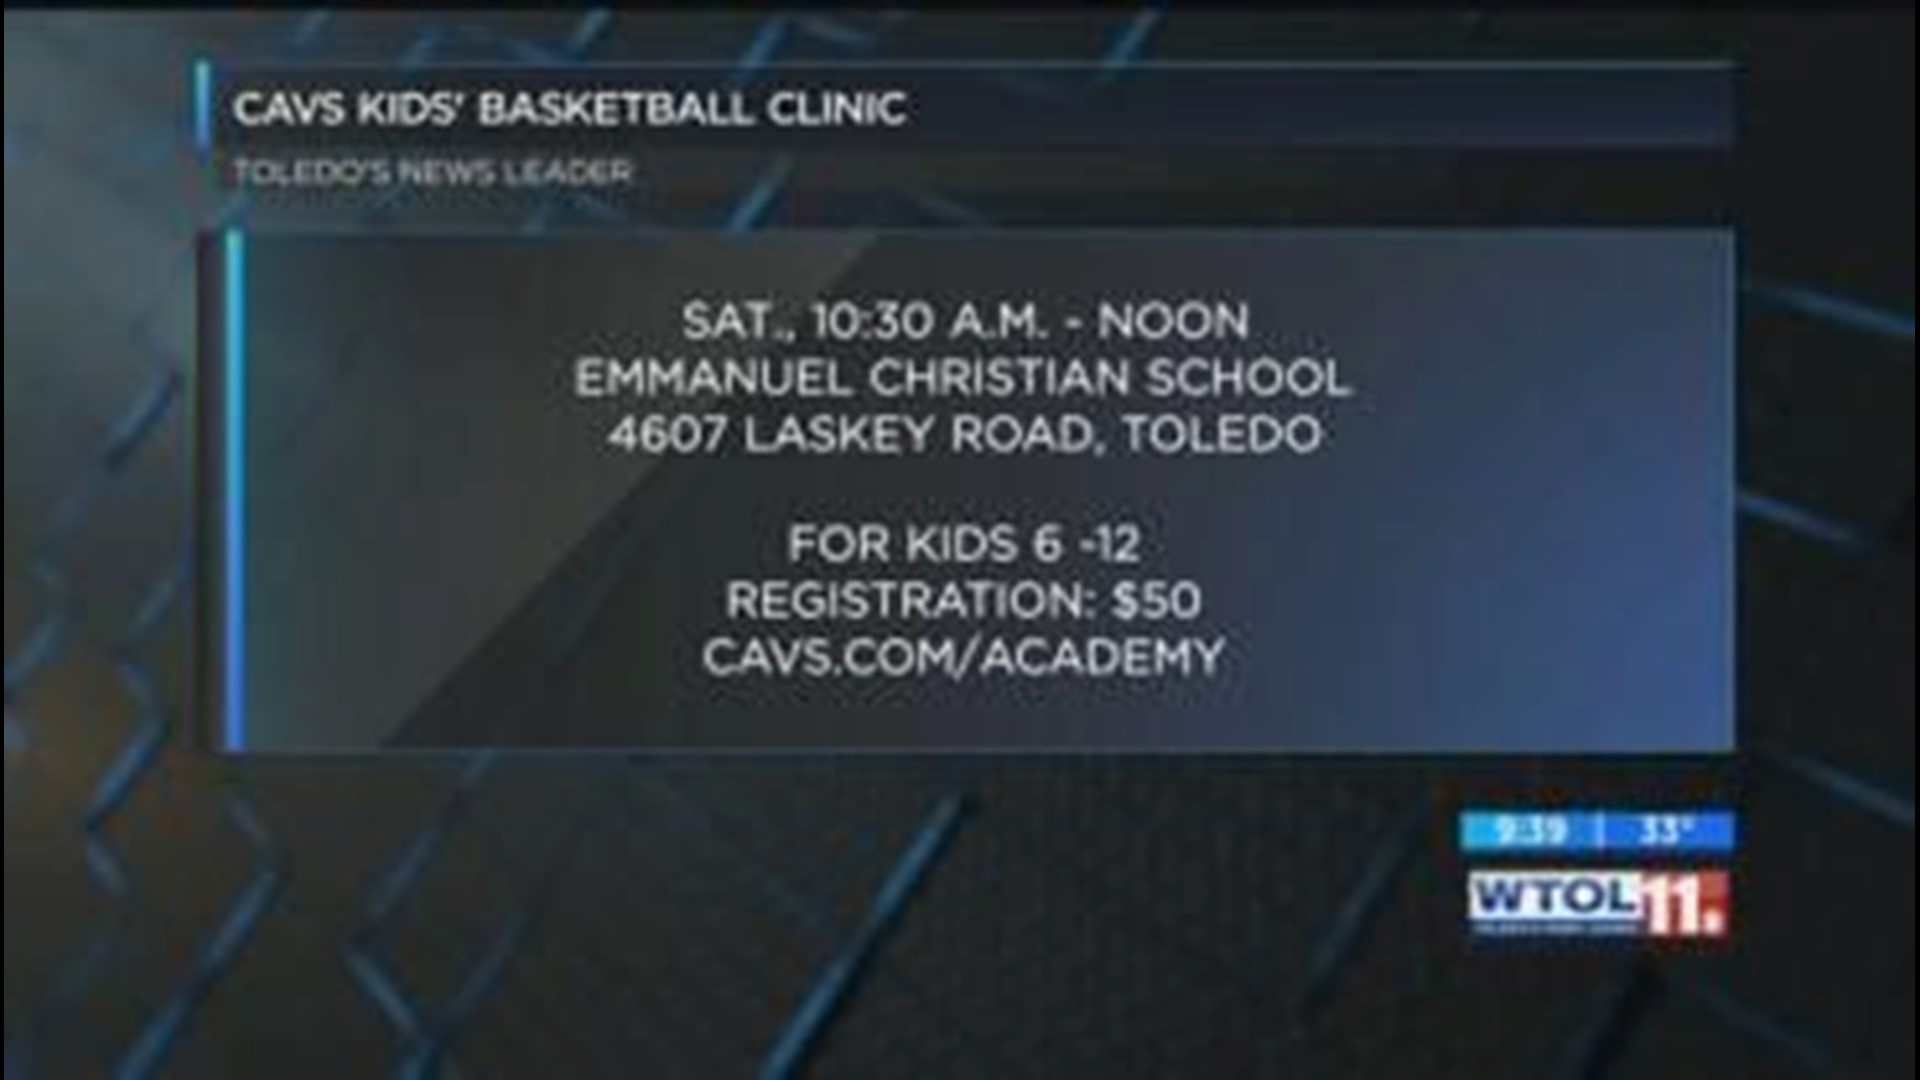 Get the kids out on the court with a Cleveland Cavs basketball clinic